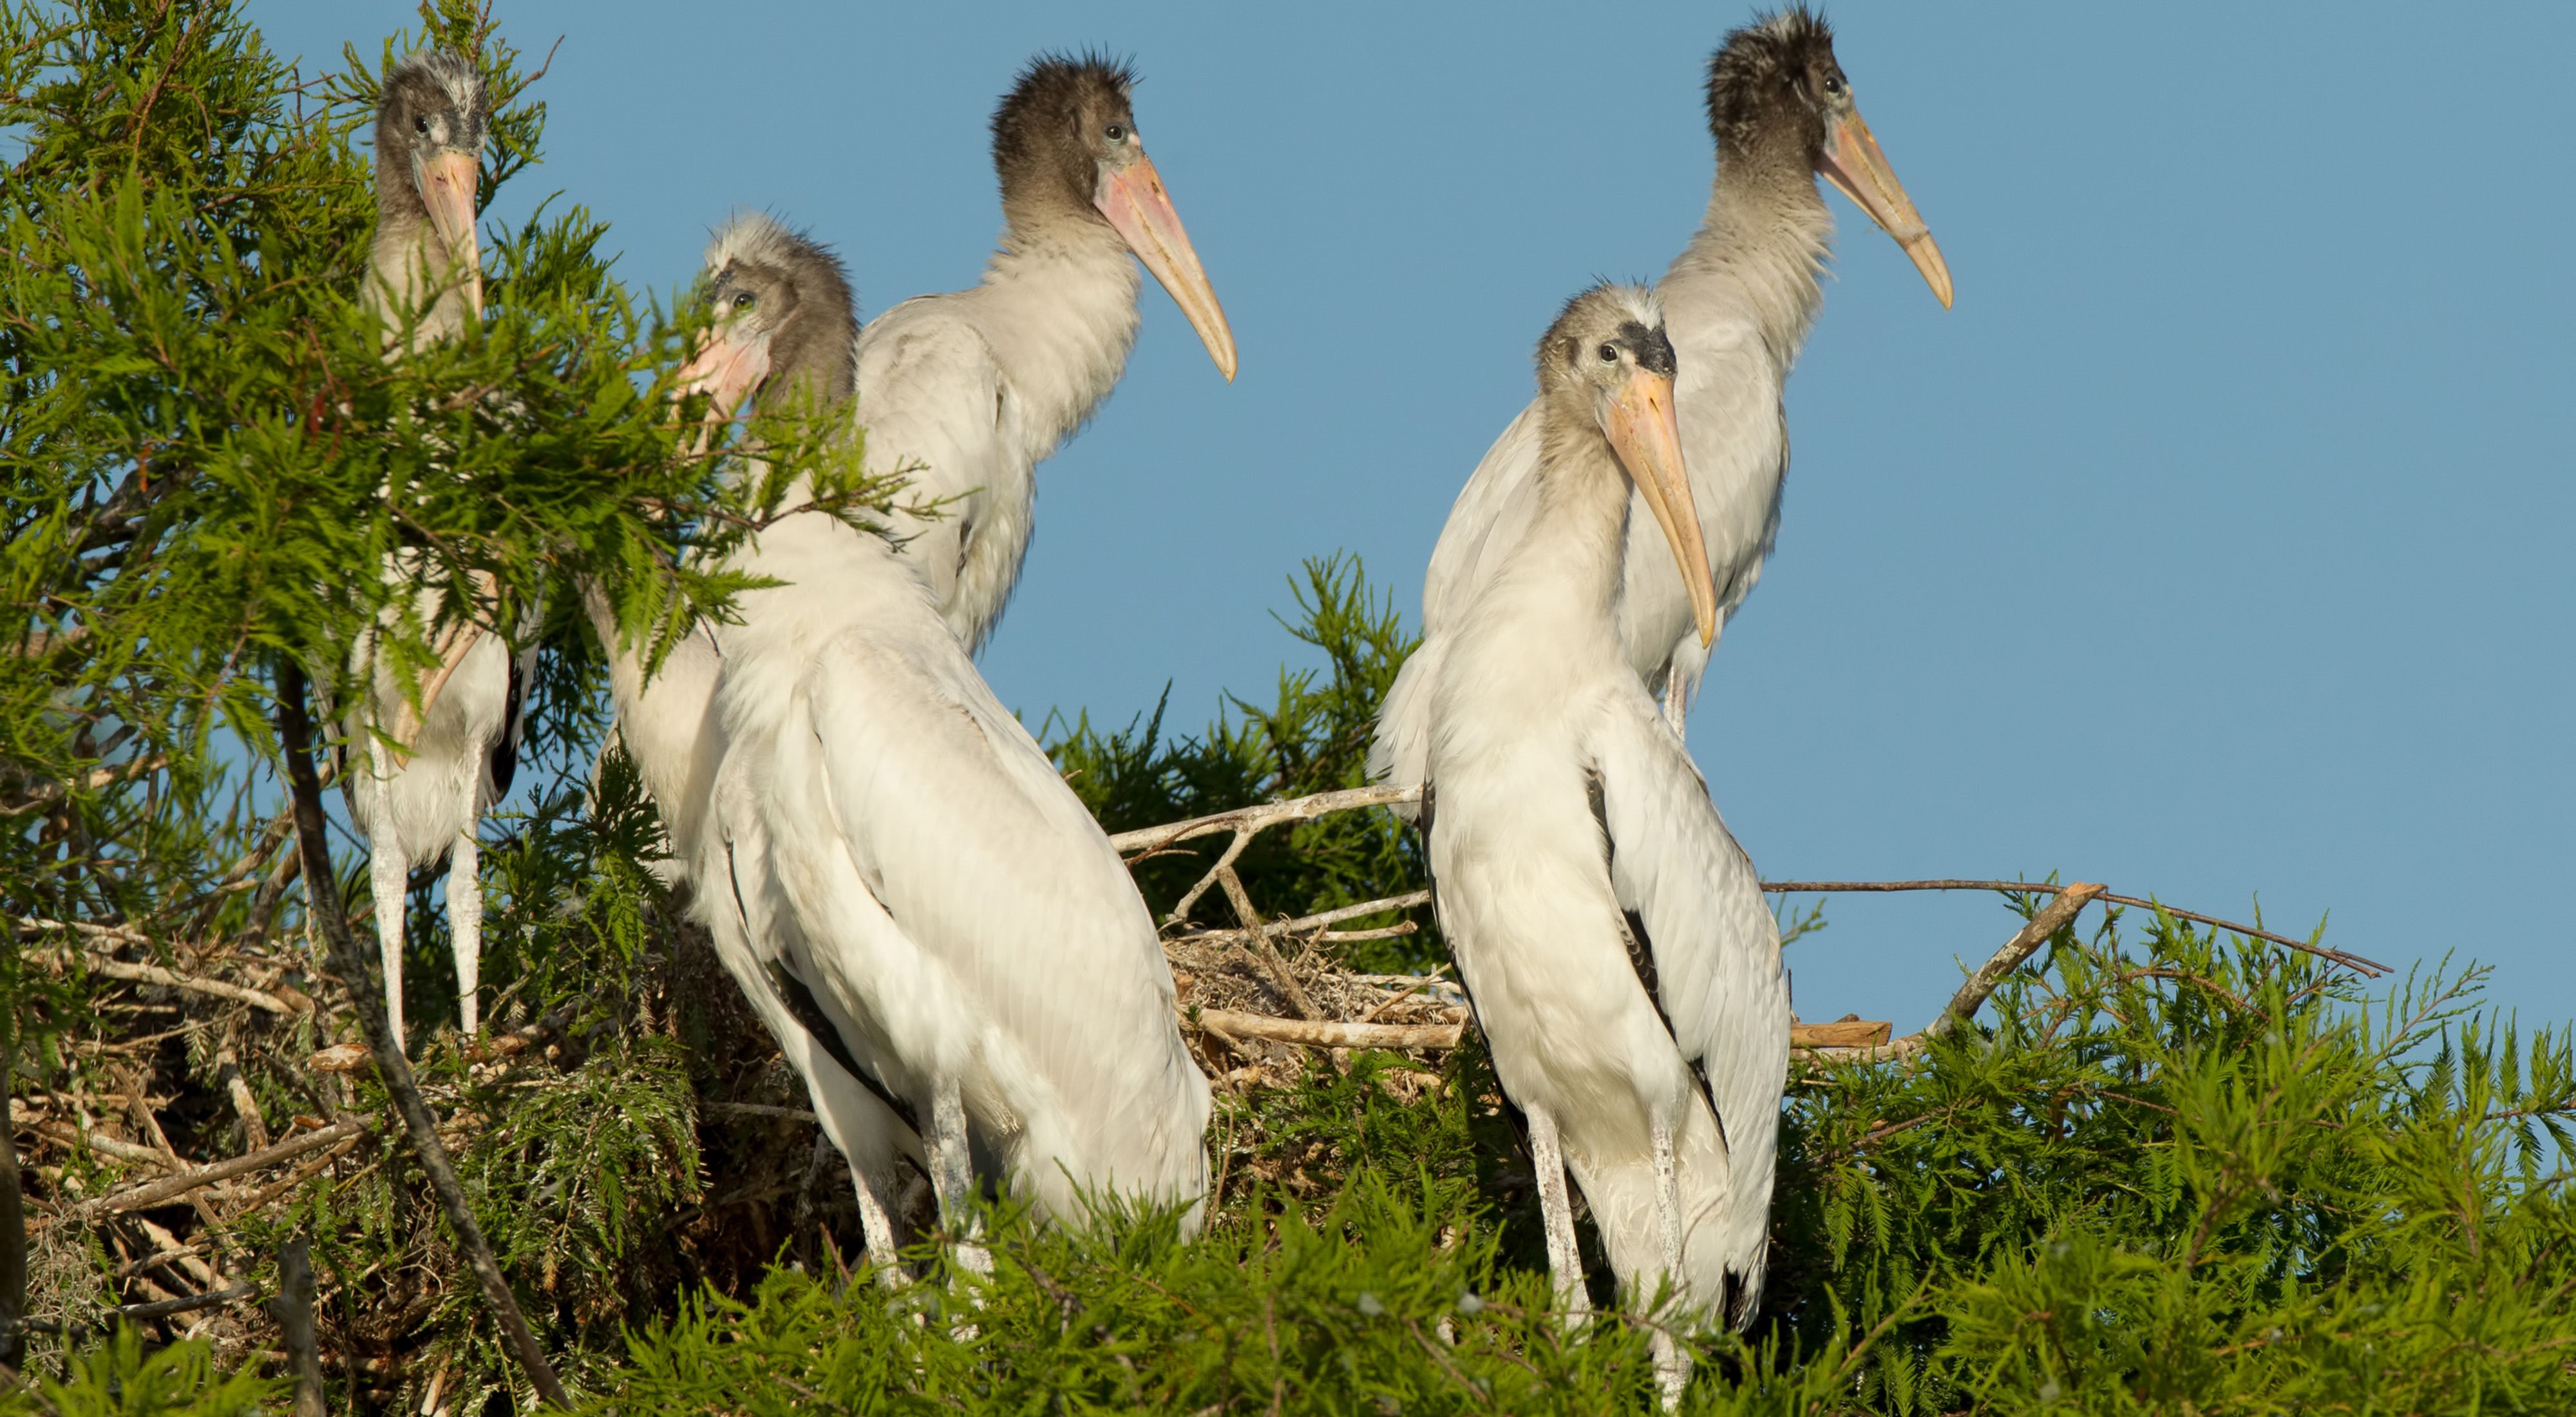 Juvenile wood storks sitting in a nest surrounded by foliage.